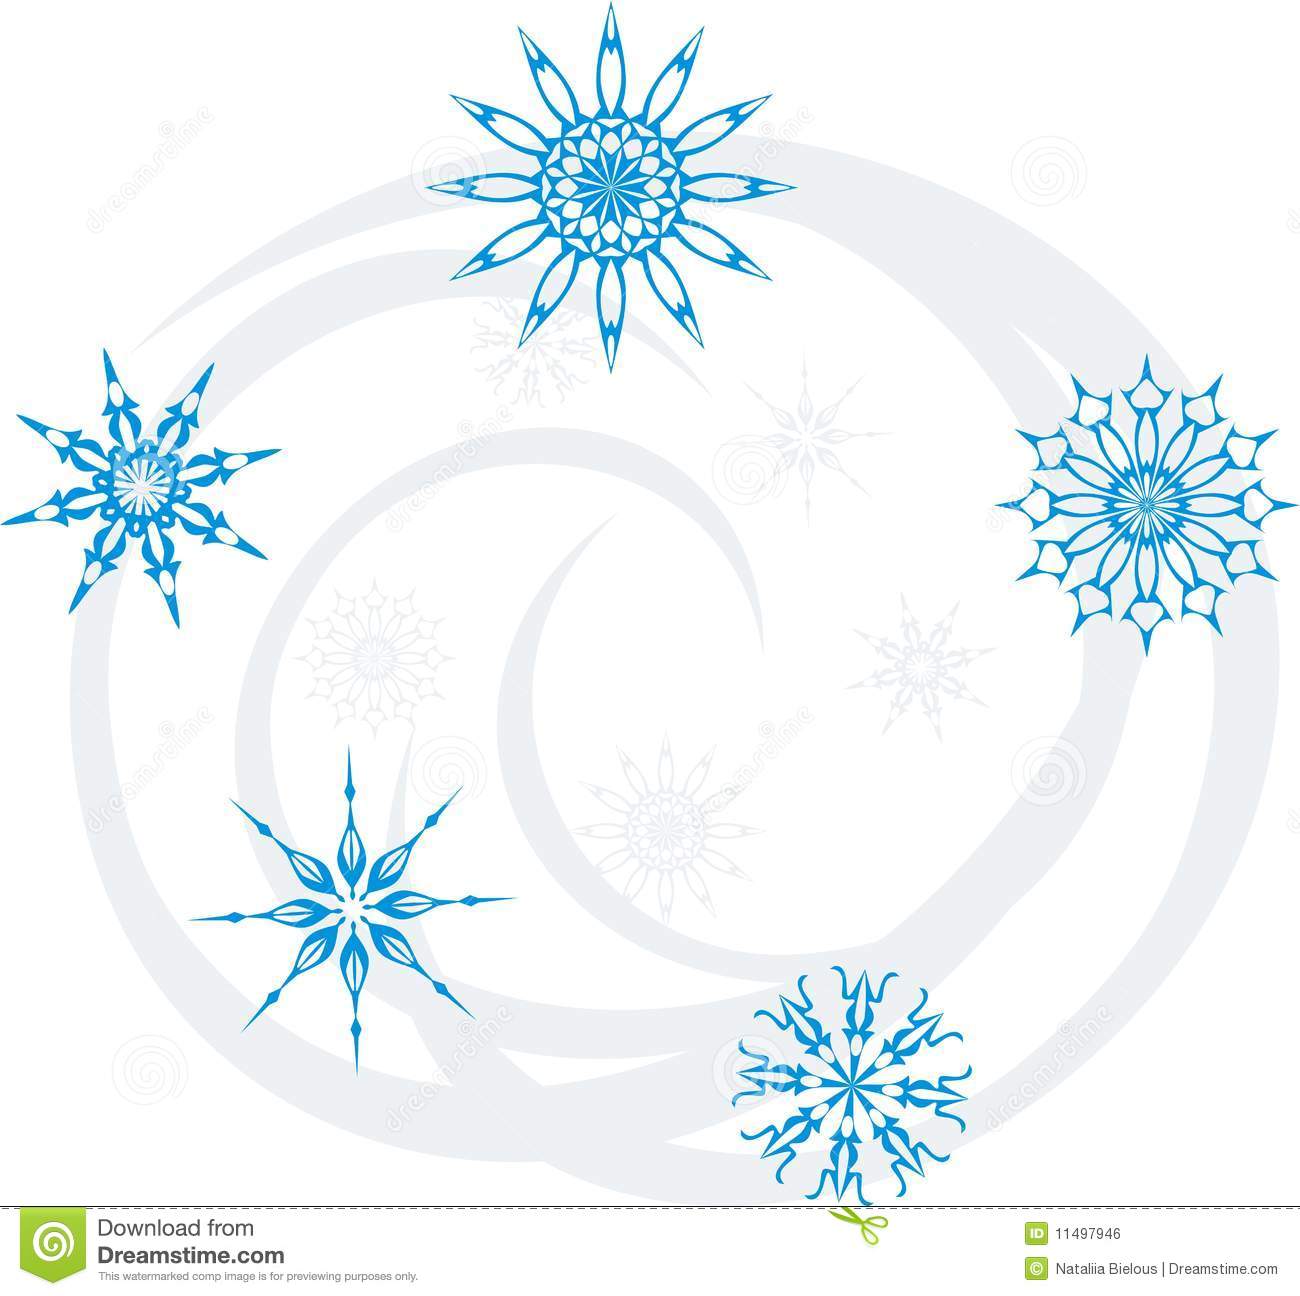 Swirl Of A Snowflakes Royalty Free Stock Image   Image  11497946